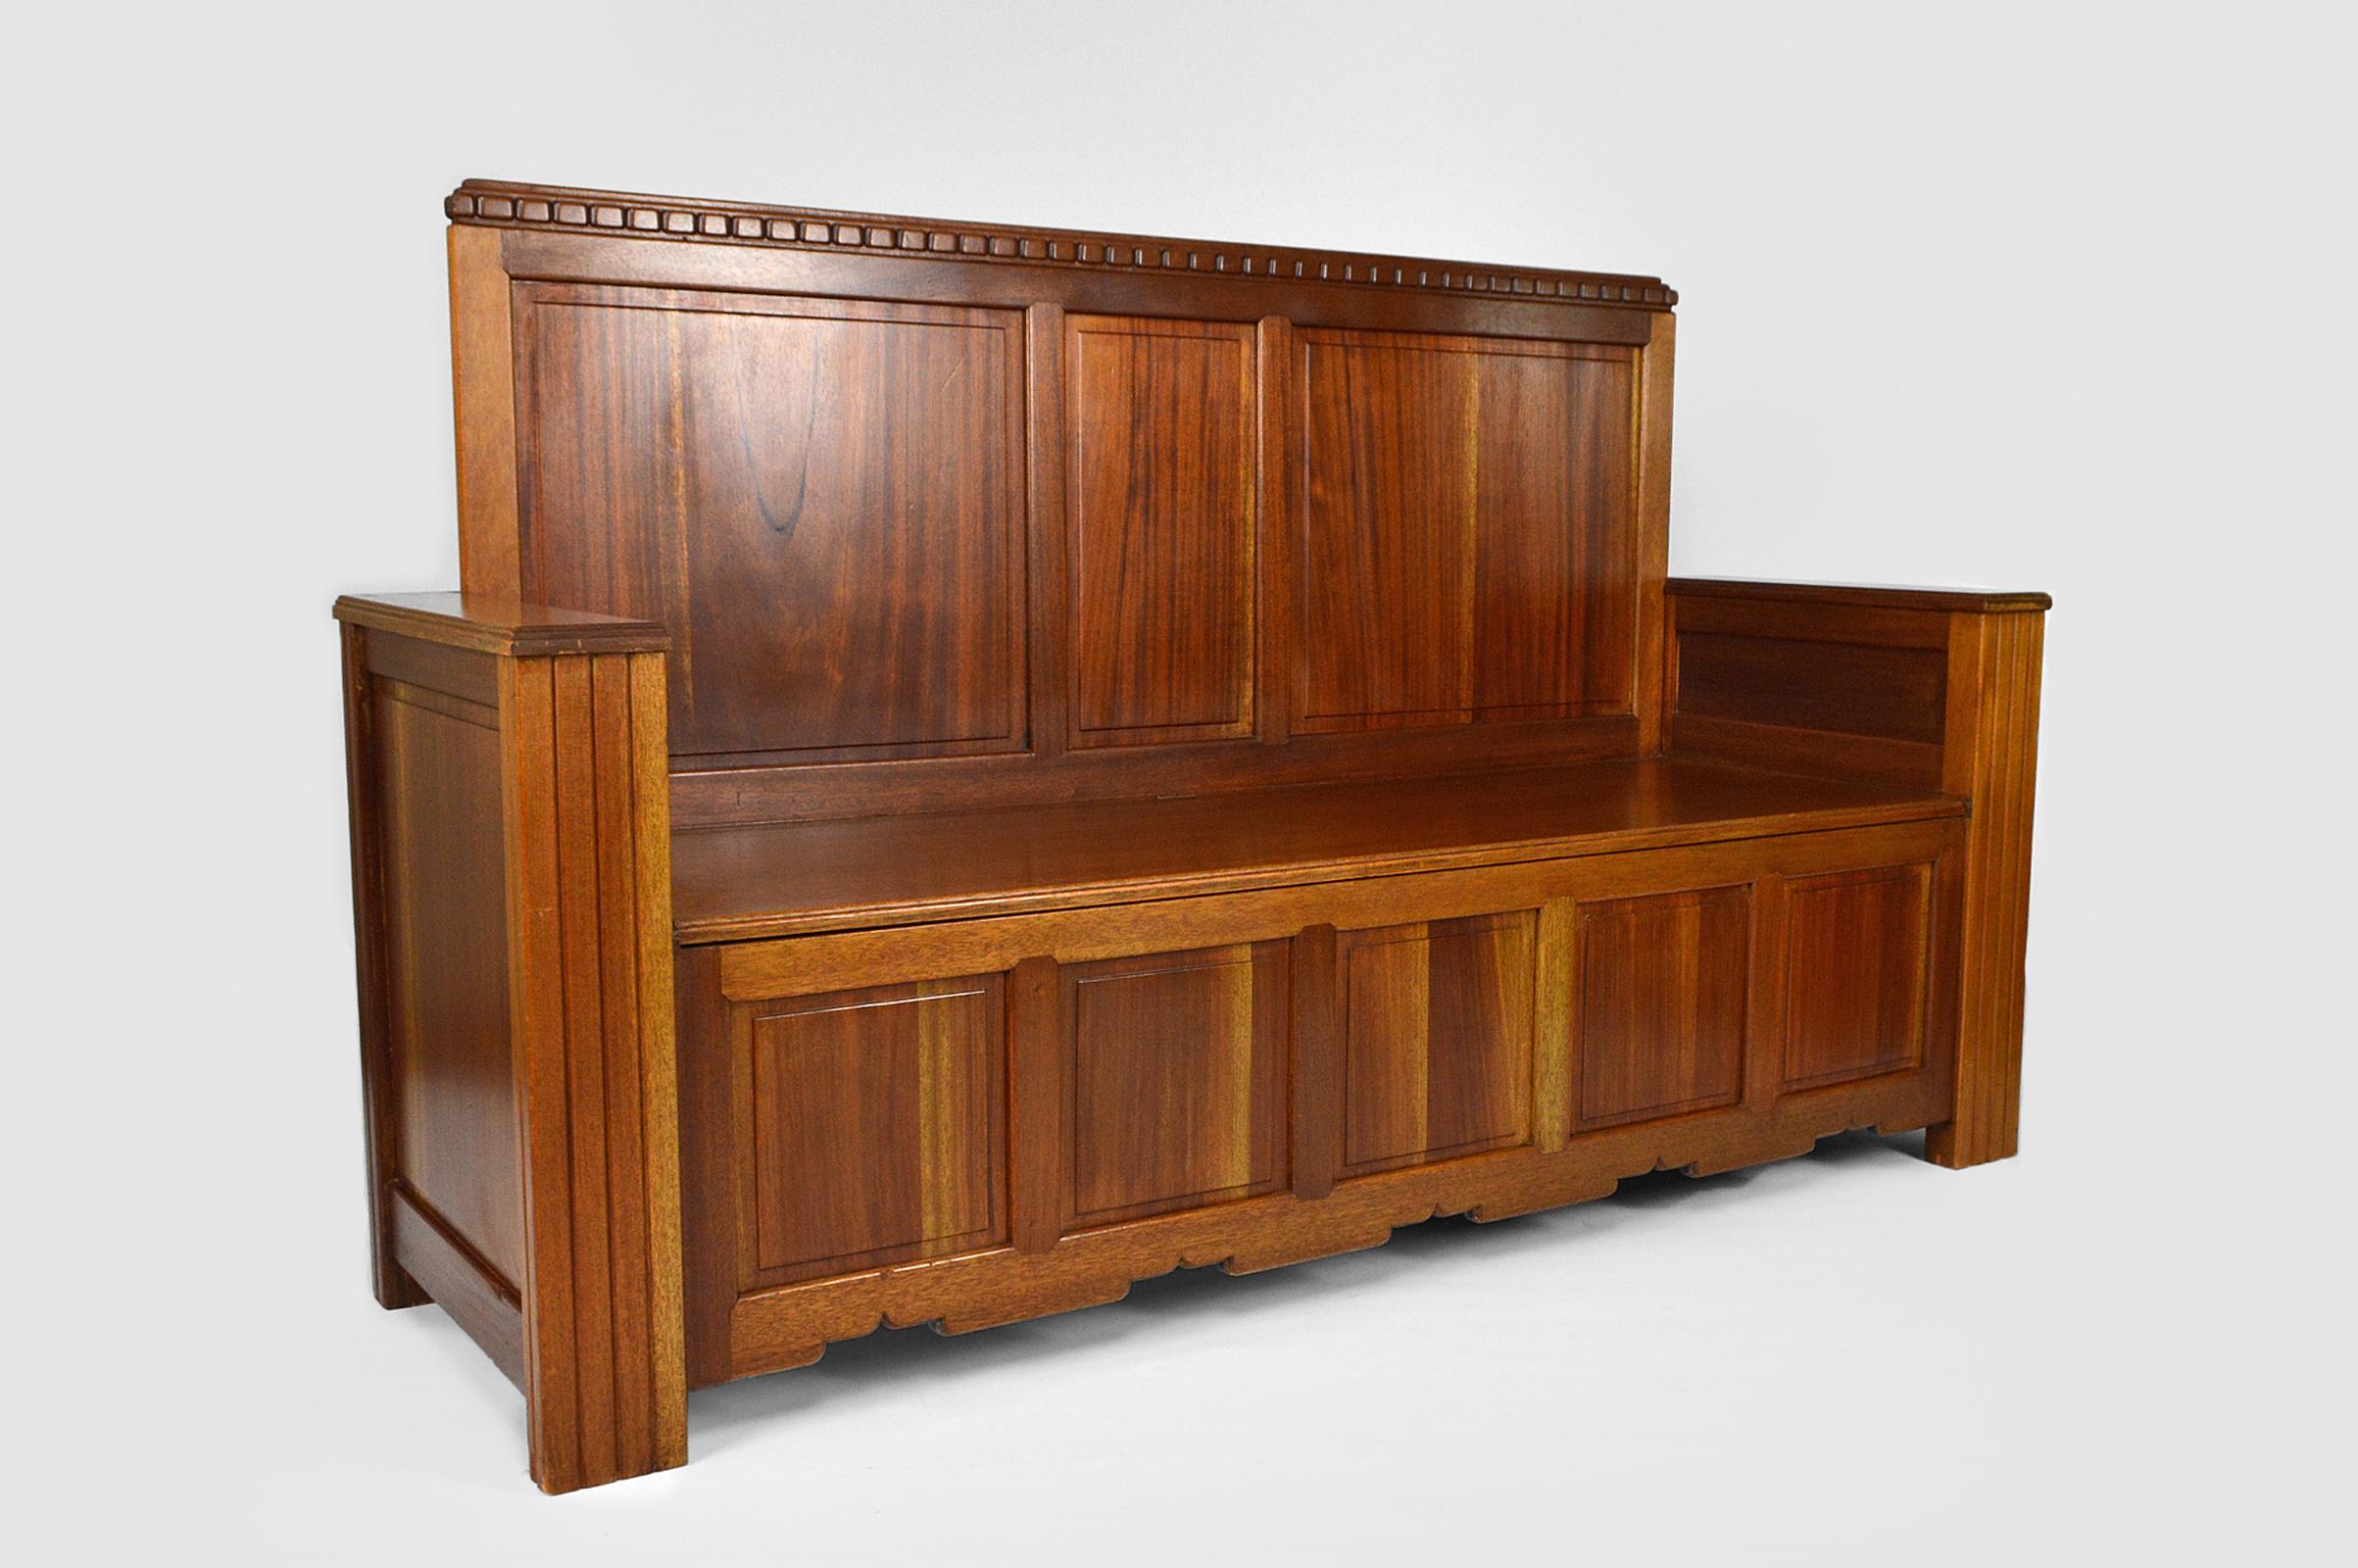 Carved Art Deco Hall Chest Bench by Clement Goyeneche in Mahogany, France, 1930s For Sale